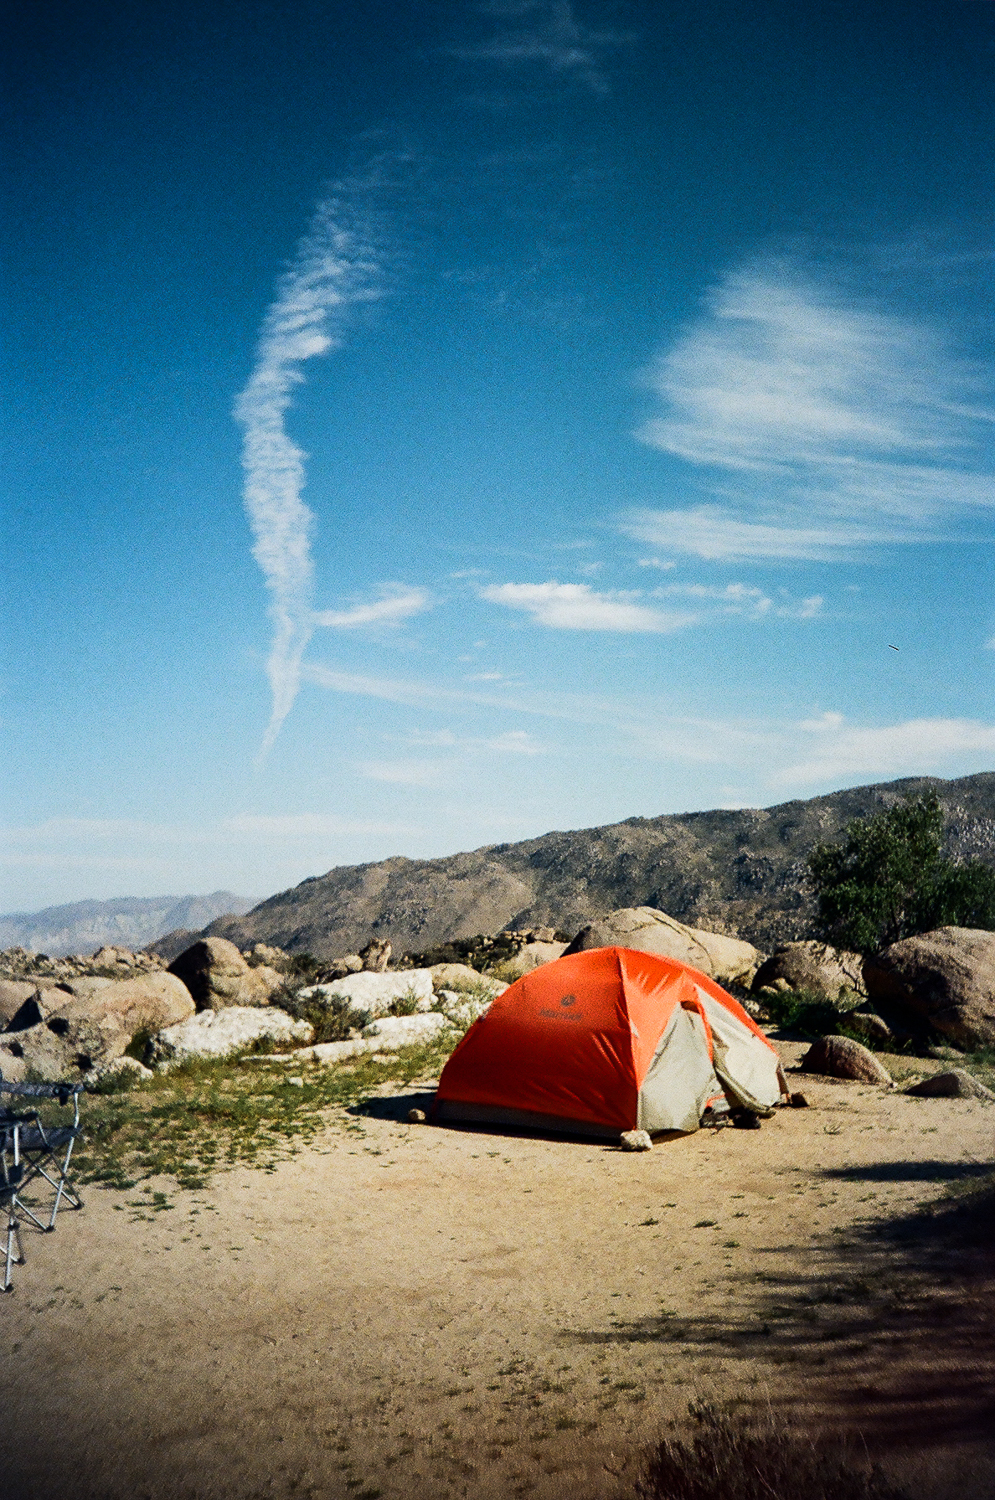 Posted Anza Borrego Tent.jpg